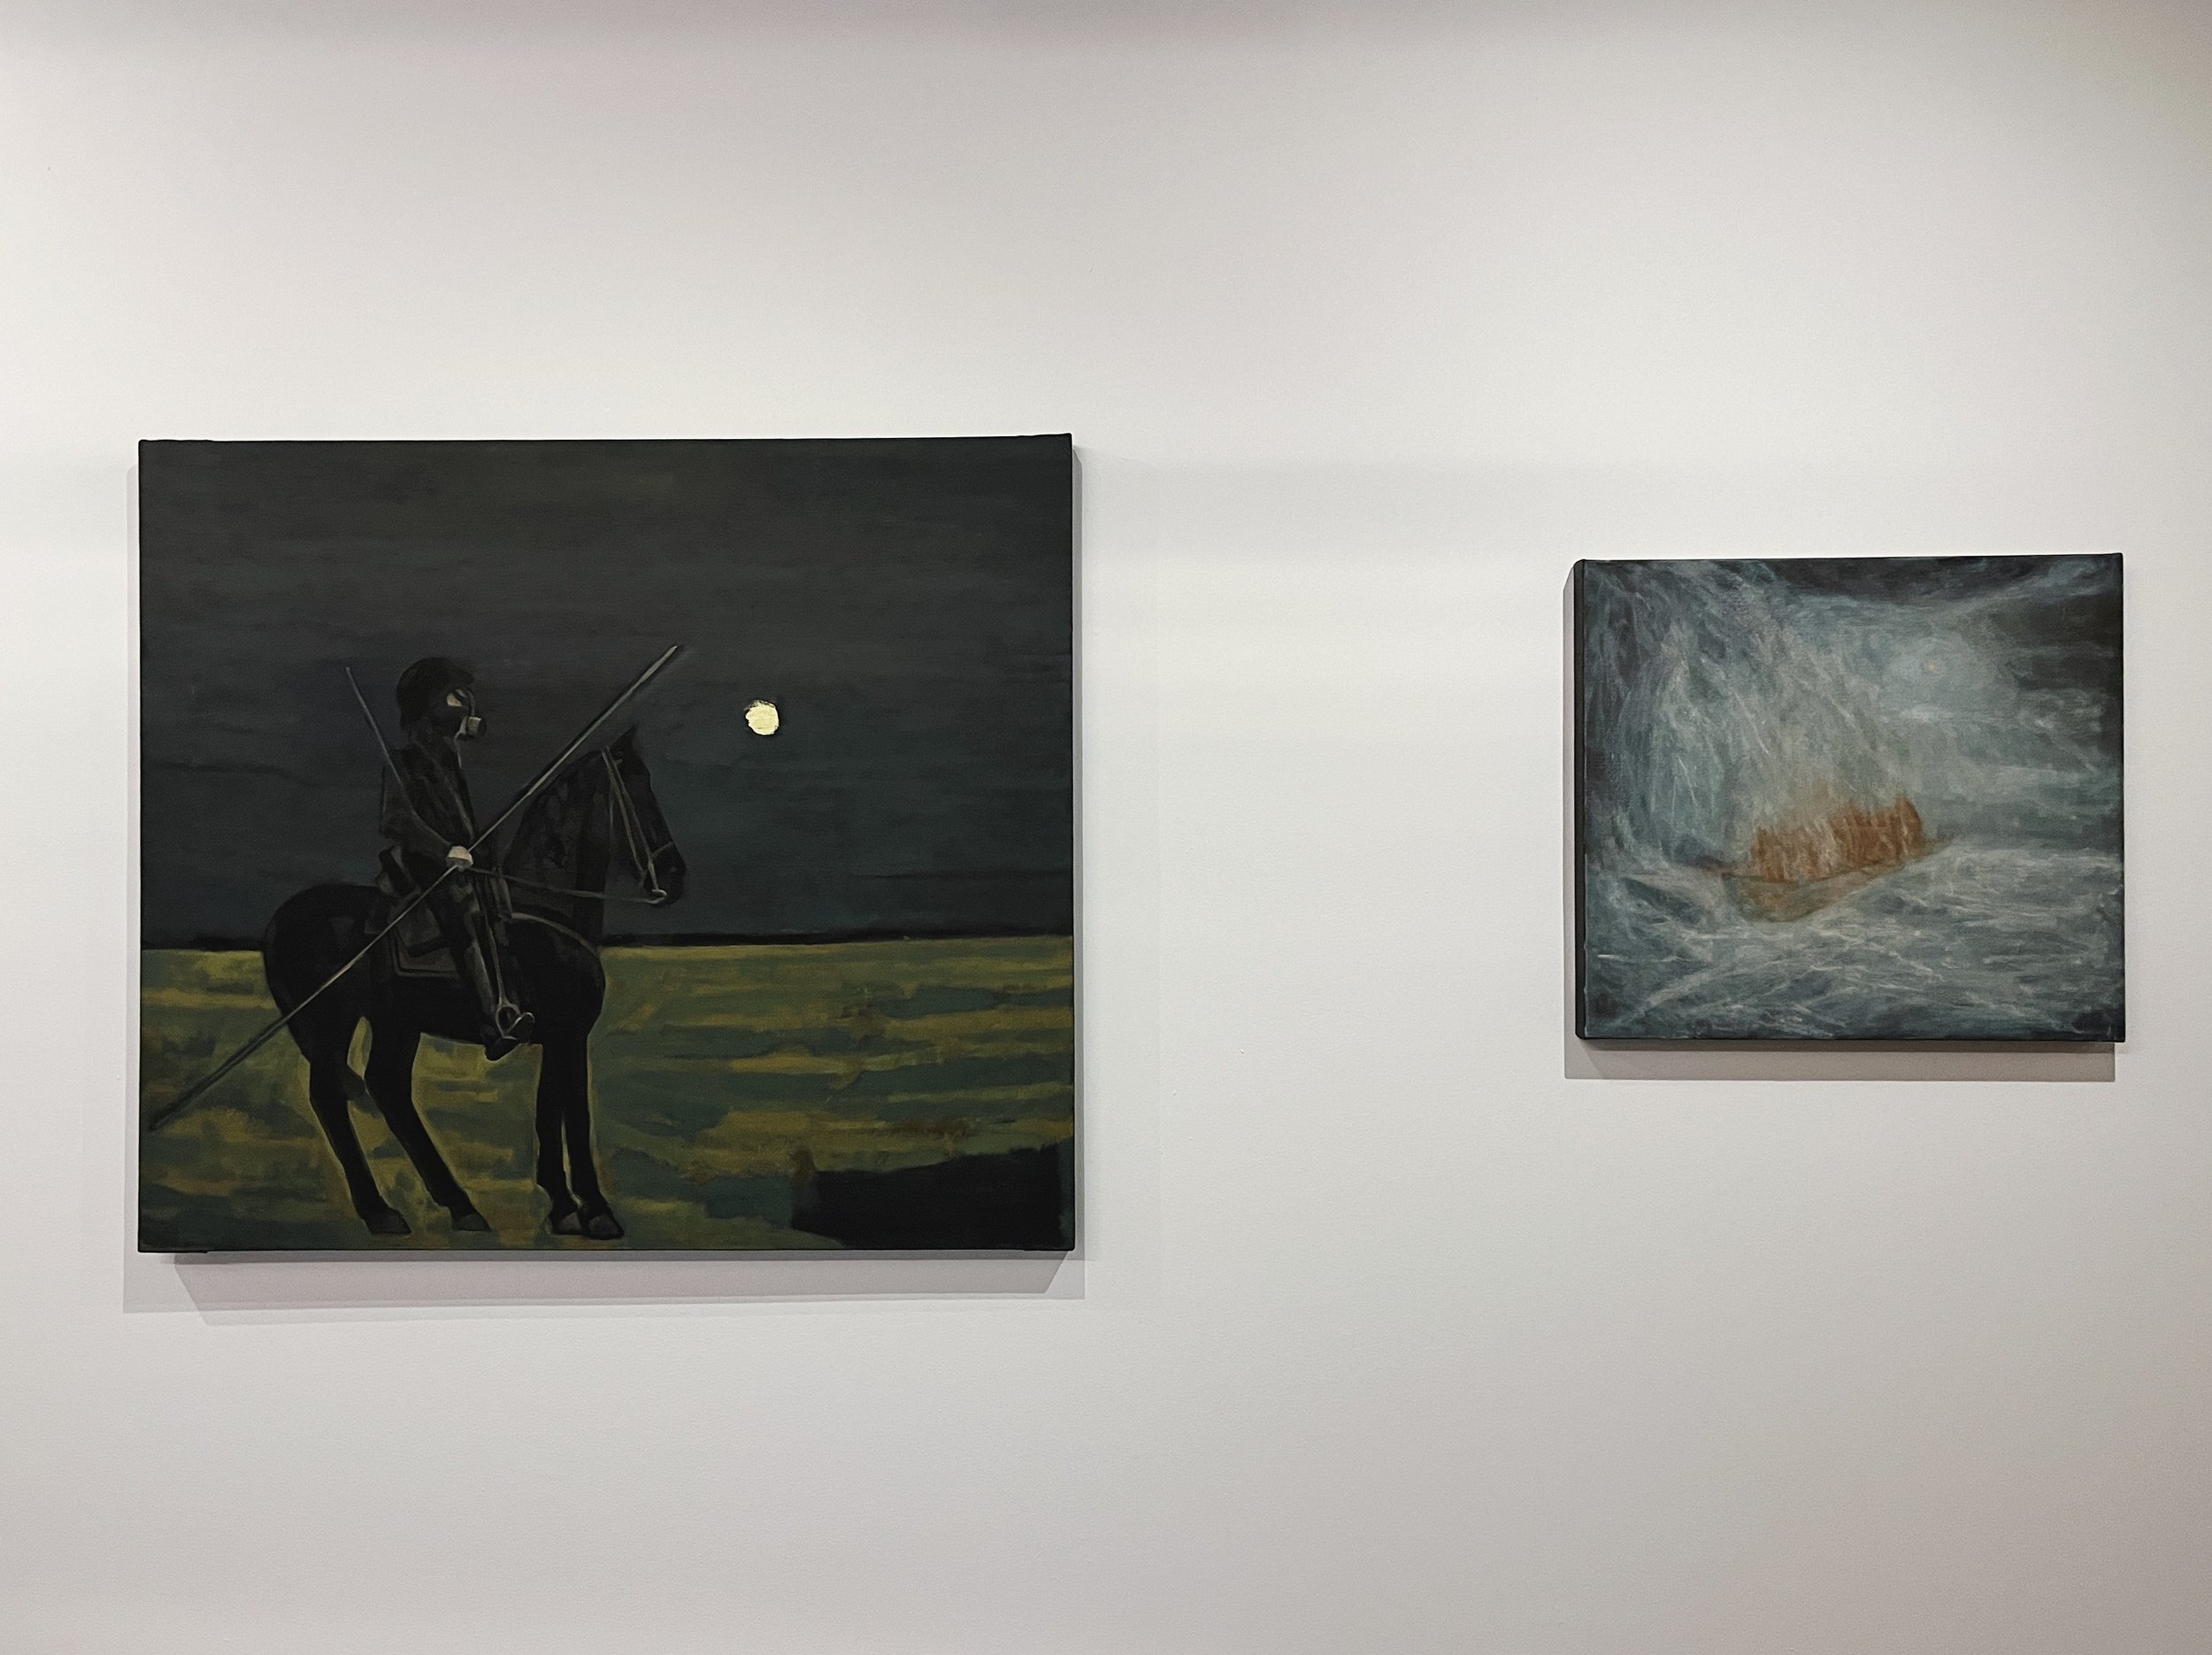   Gregory Kwiatek   1918 Nocturne (left)  2021 Oil on linen 38 x 54 inches   Stranded at Sea I (right)  2020 Oil on linen 22 x 24 inches 